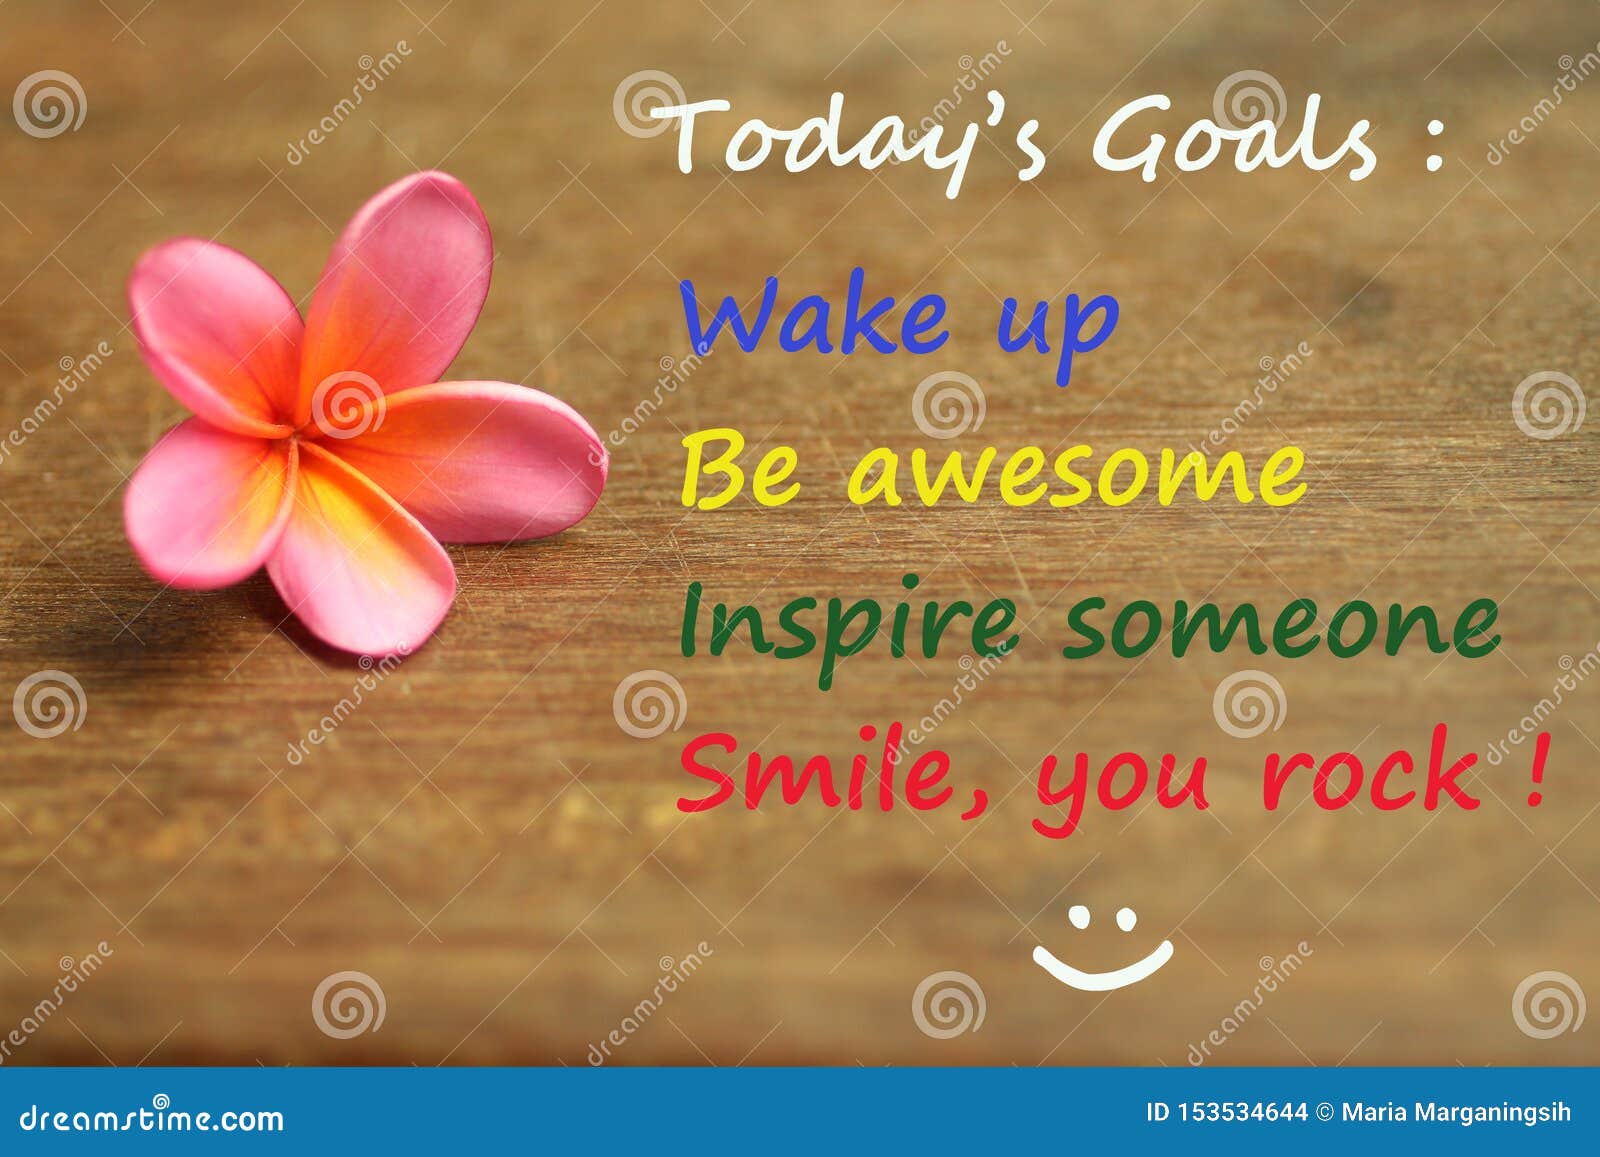 inspirational motivational quote - today goals ; wake up, be awesome, inspire someone, smile, you rock. with self notes reminder